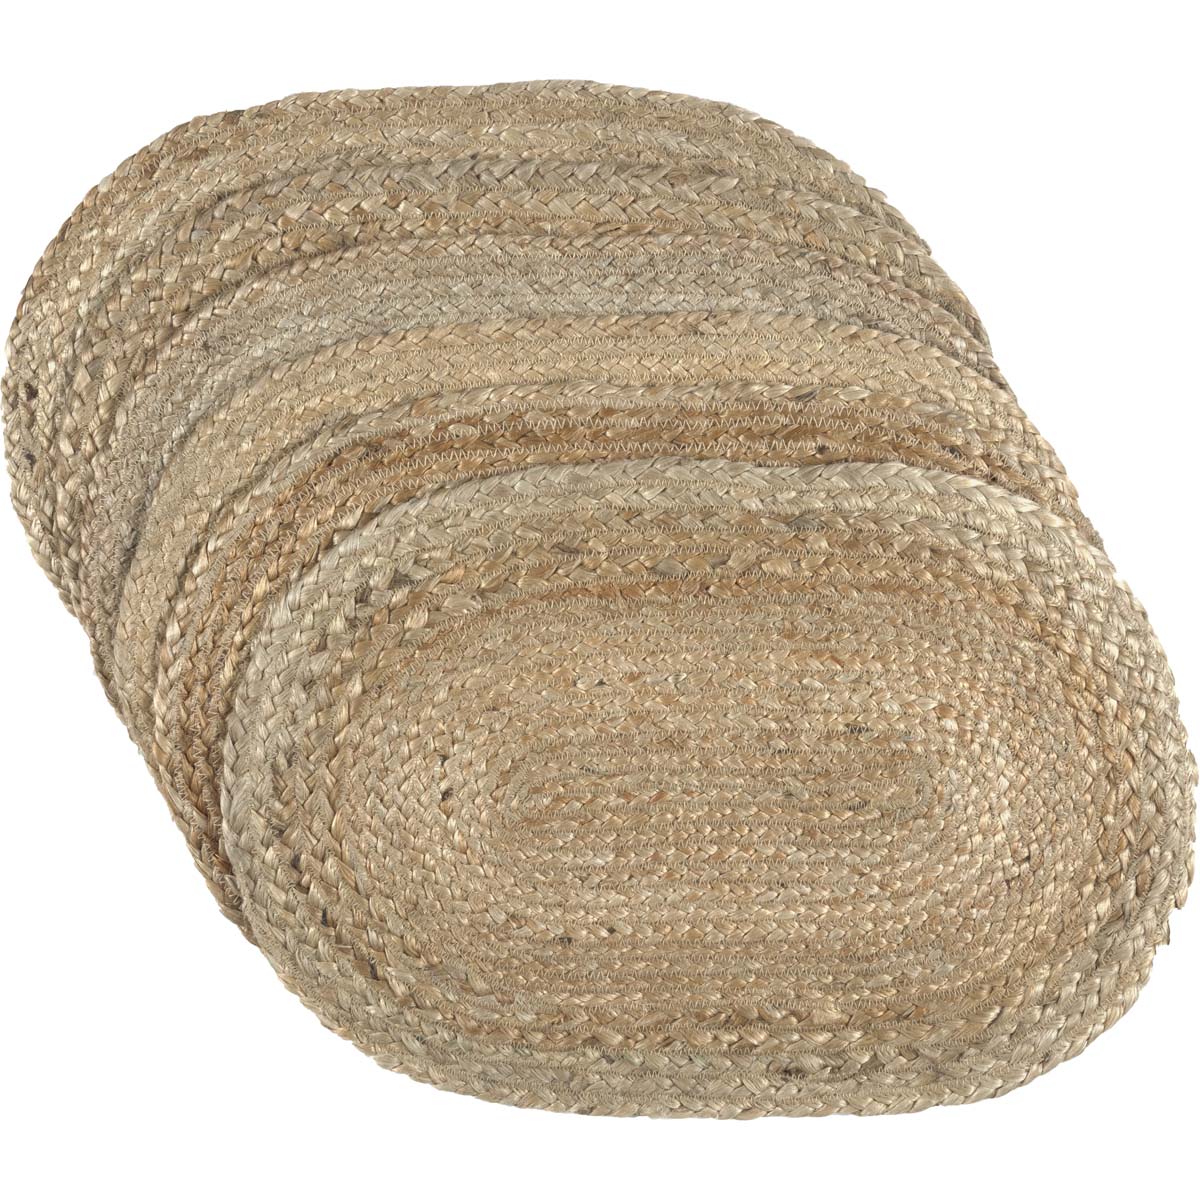 Natural Jute Braided Placemats Set of 6 - VHC Brands